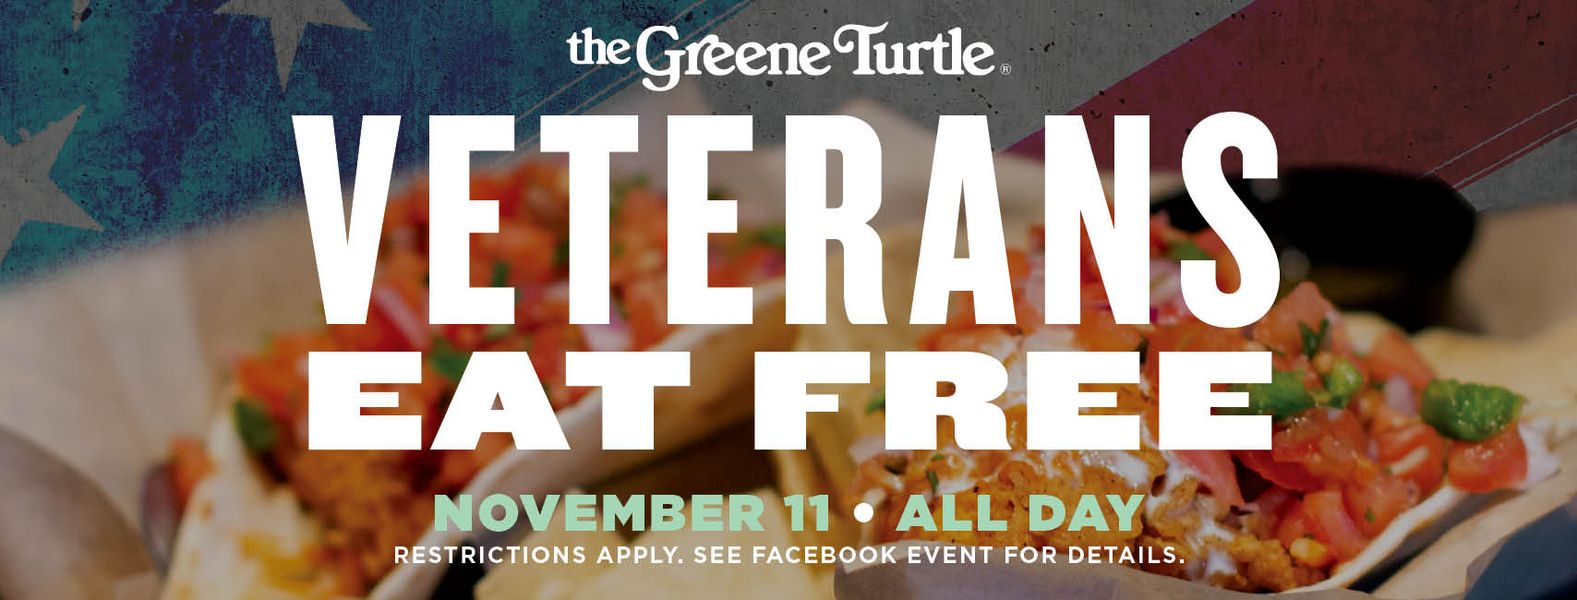 The Greene Turtle Sports Bar FREE Veterans Day Meal